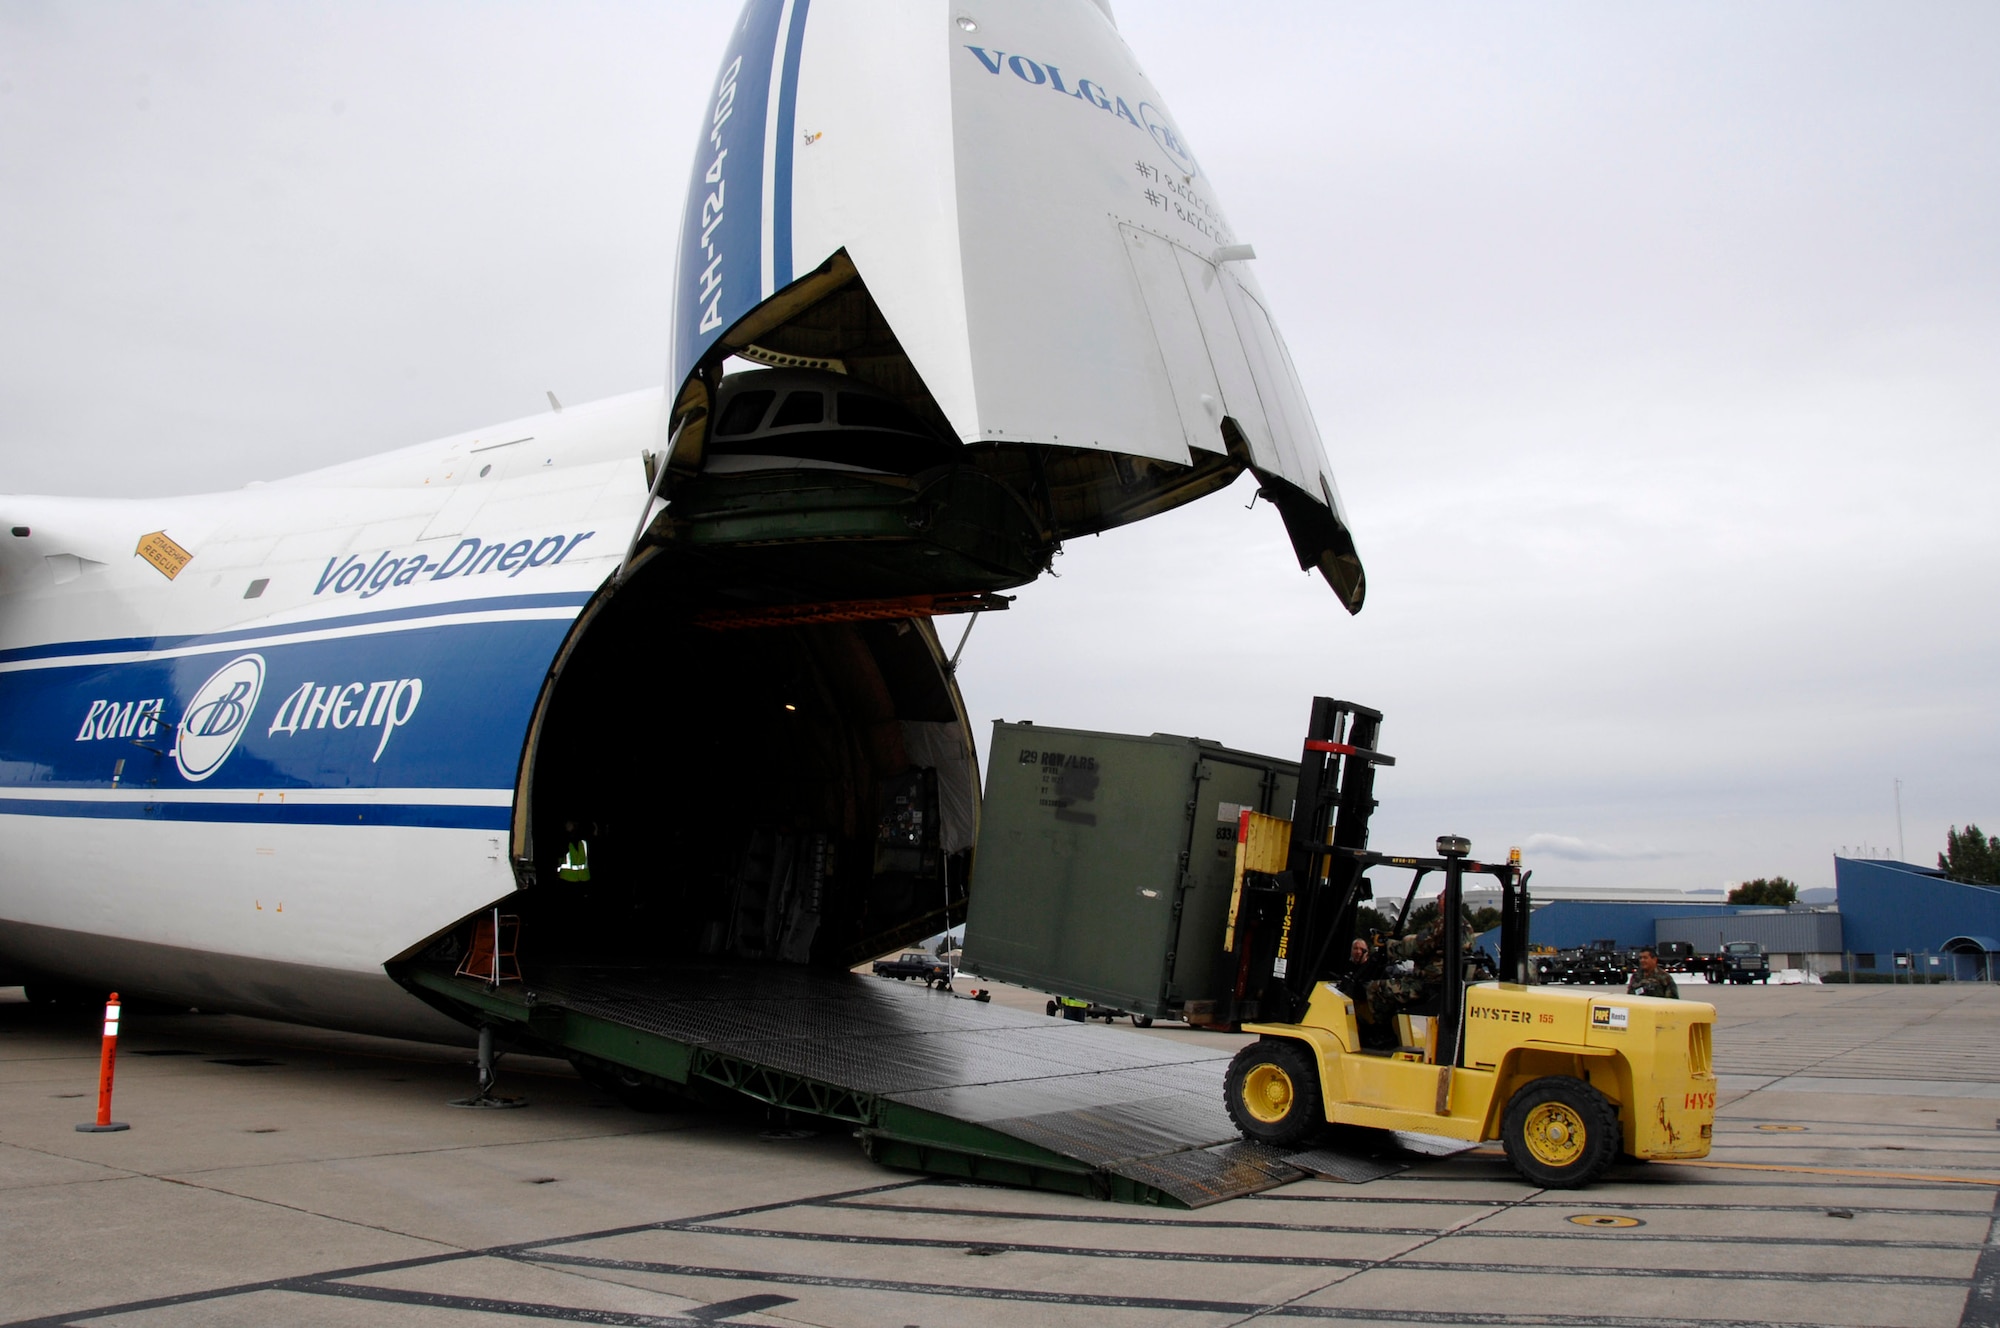 Airmen from the 129th Rescue Wing load cargo onto a Russian Volga-Dnepr AN-124 long-range heavy transport aircraft April 21 at Moffett Federal Airfield, Calif. The contracted AN-124 transported 129th Rescue Wing deployment cargo to Afghanistan because the high operations tempos of Operations Iraqi Freedom and Enduring Freedom have kept C-17 Globemaster III and C-5 Galaxy aircraft fully engaged. (U.S. Air Force photo/Master Sgt. Daniel Kacir)